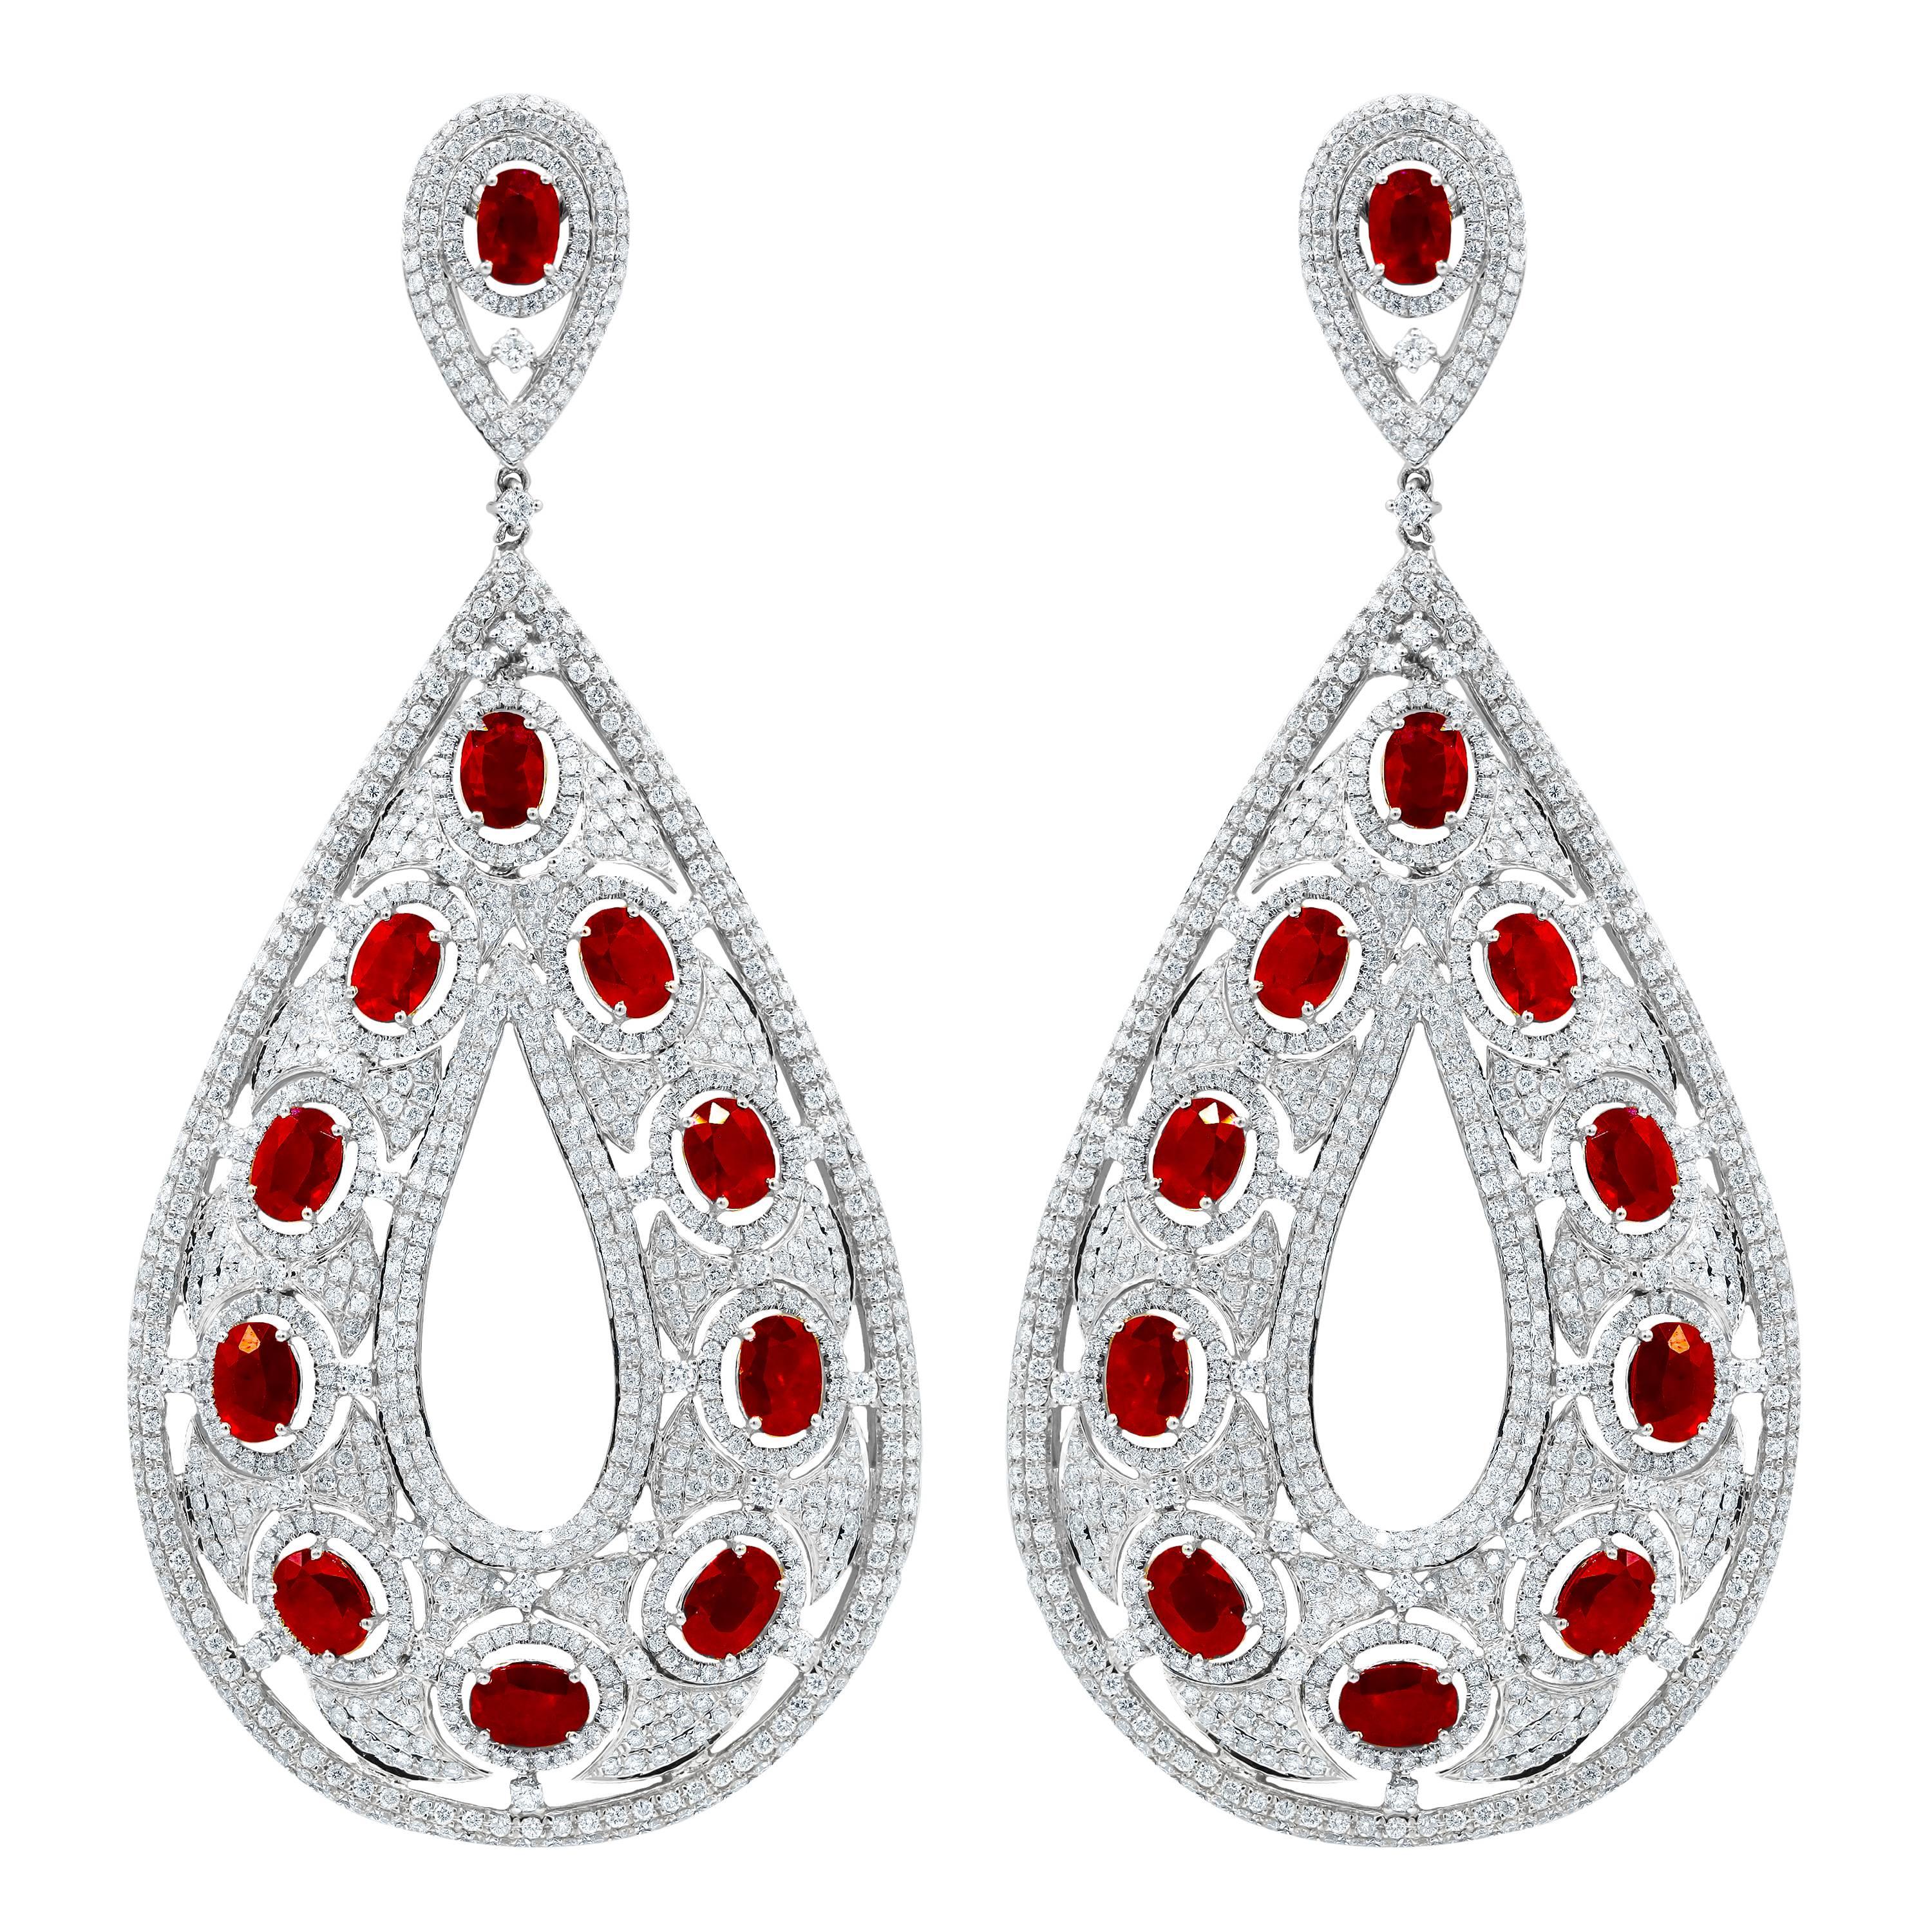 Large Ruby and Diamond Earrings